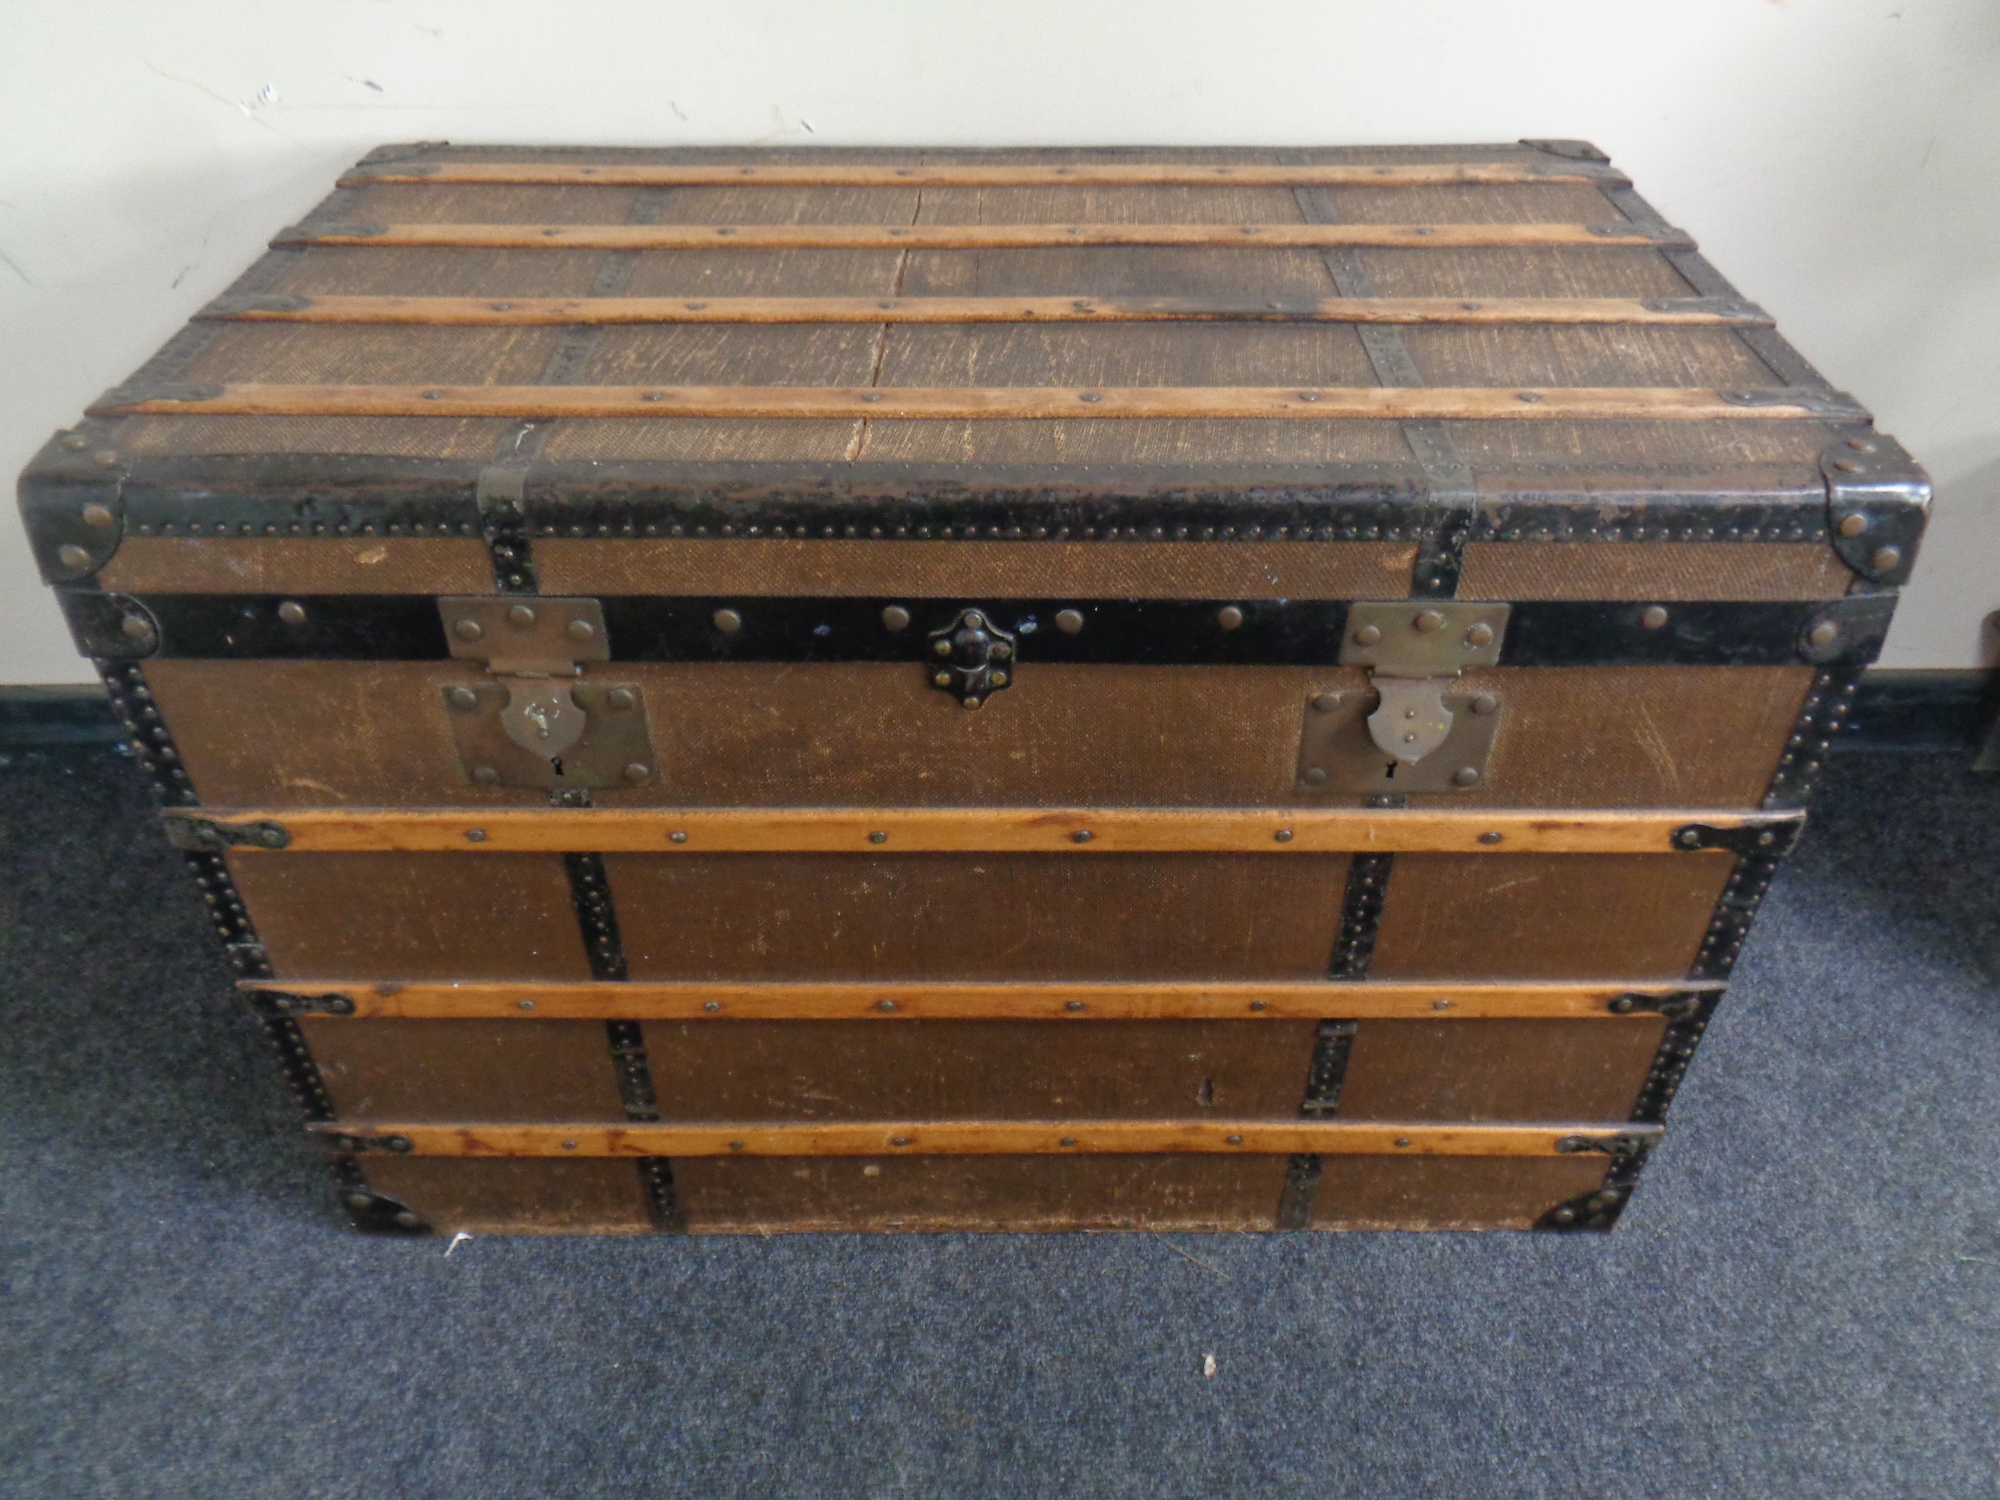 An early 20th century wooden bound shipping trunk